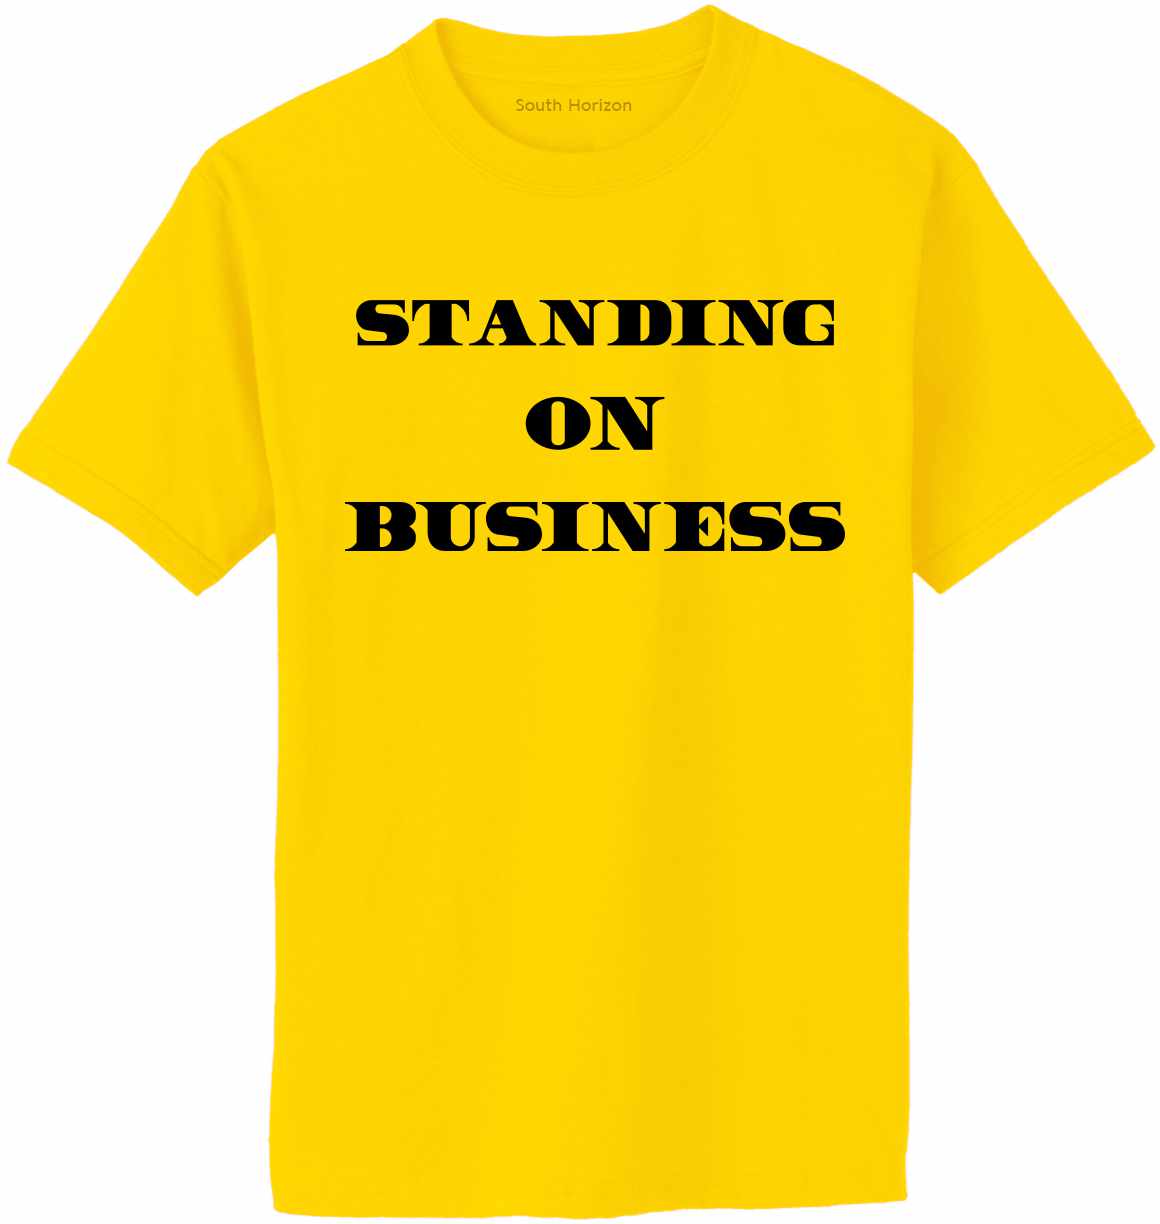 Standing On Business on Adult T-Shirt (#1398-1)